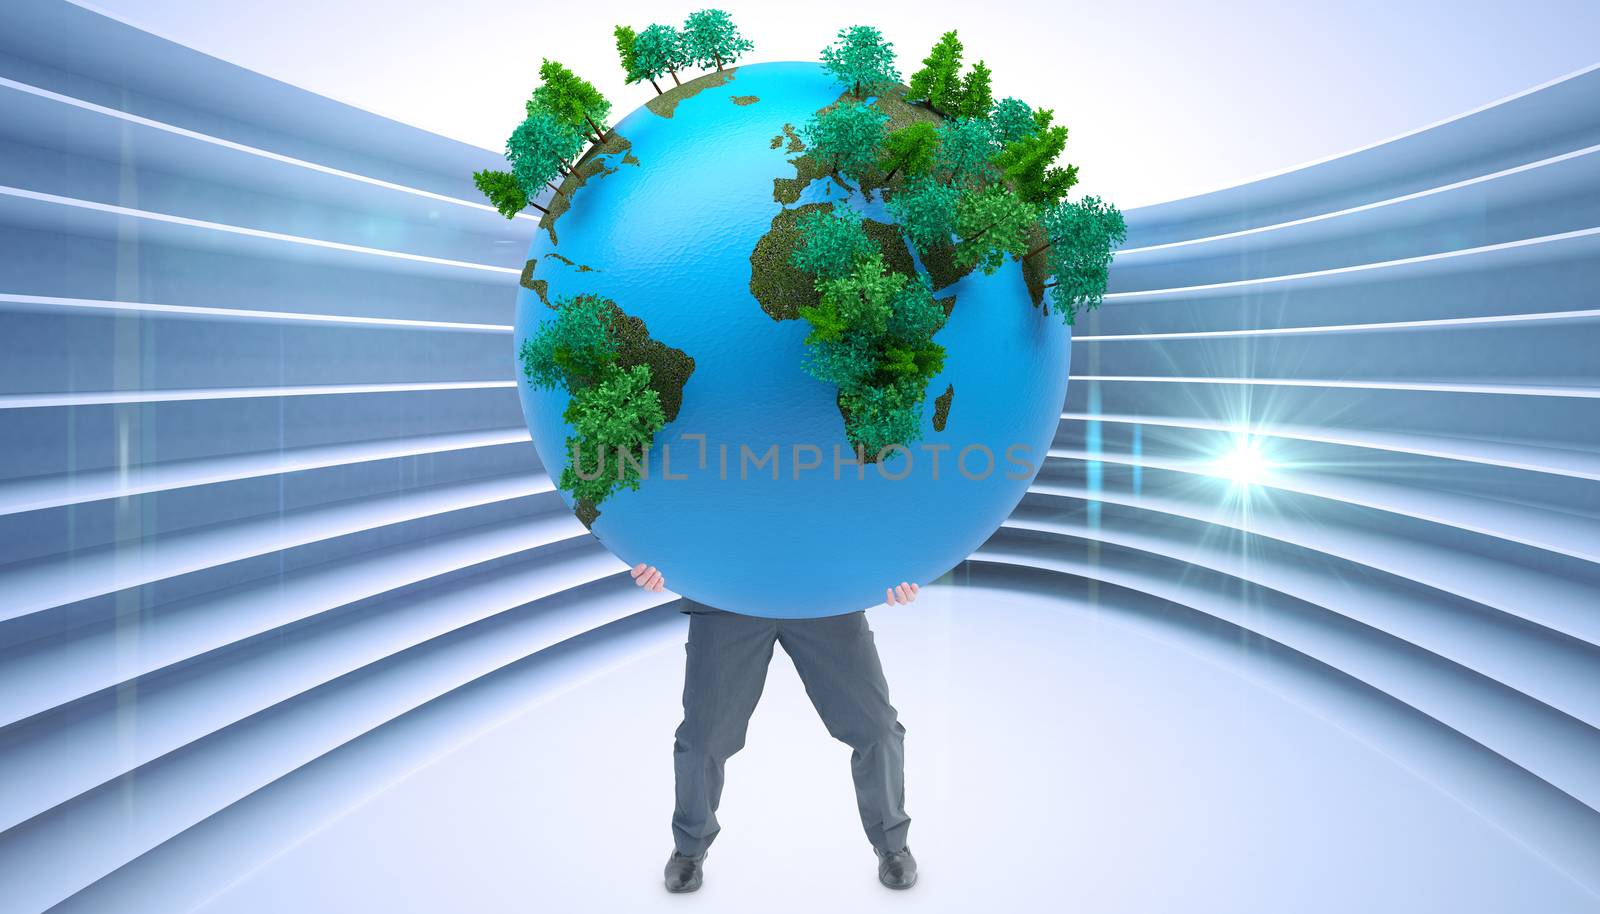 Composite image of businessman carrying the world by Wavebreakmedia